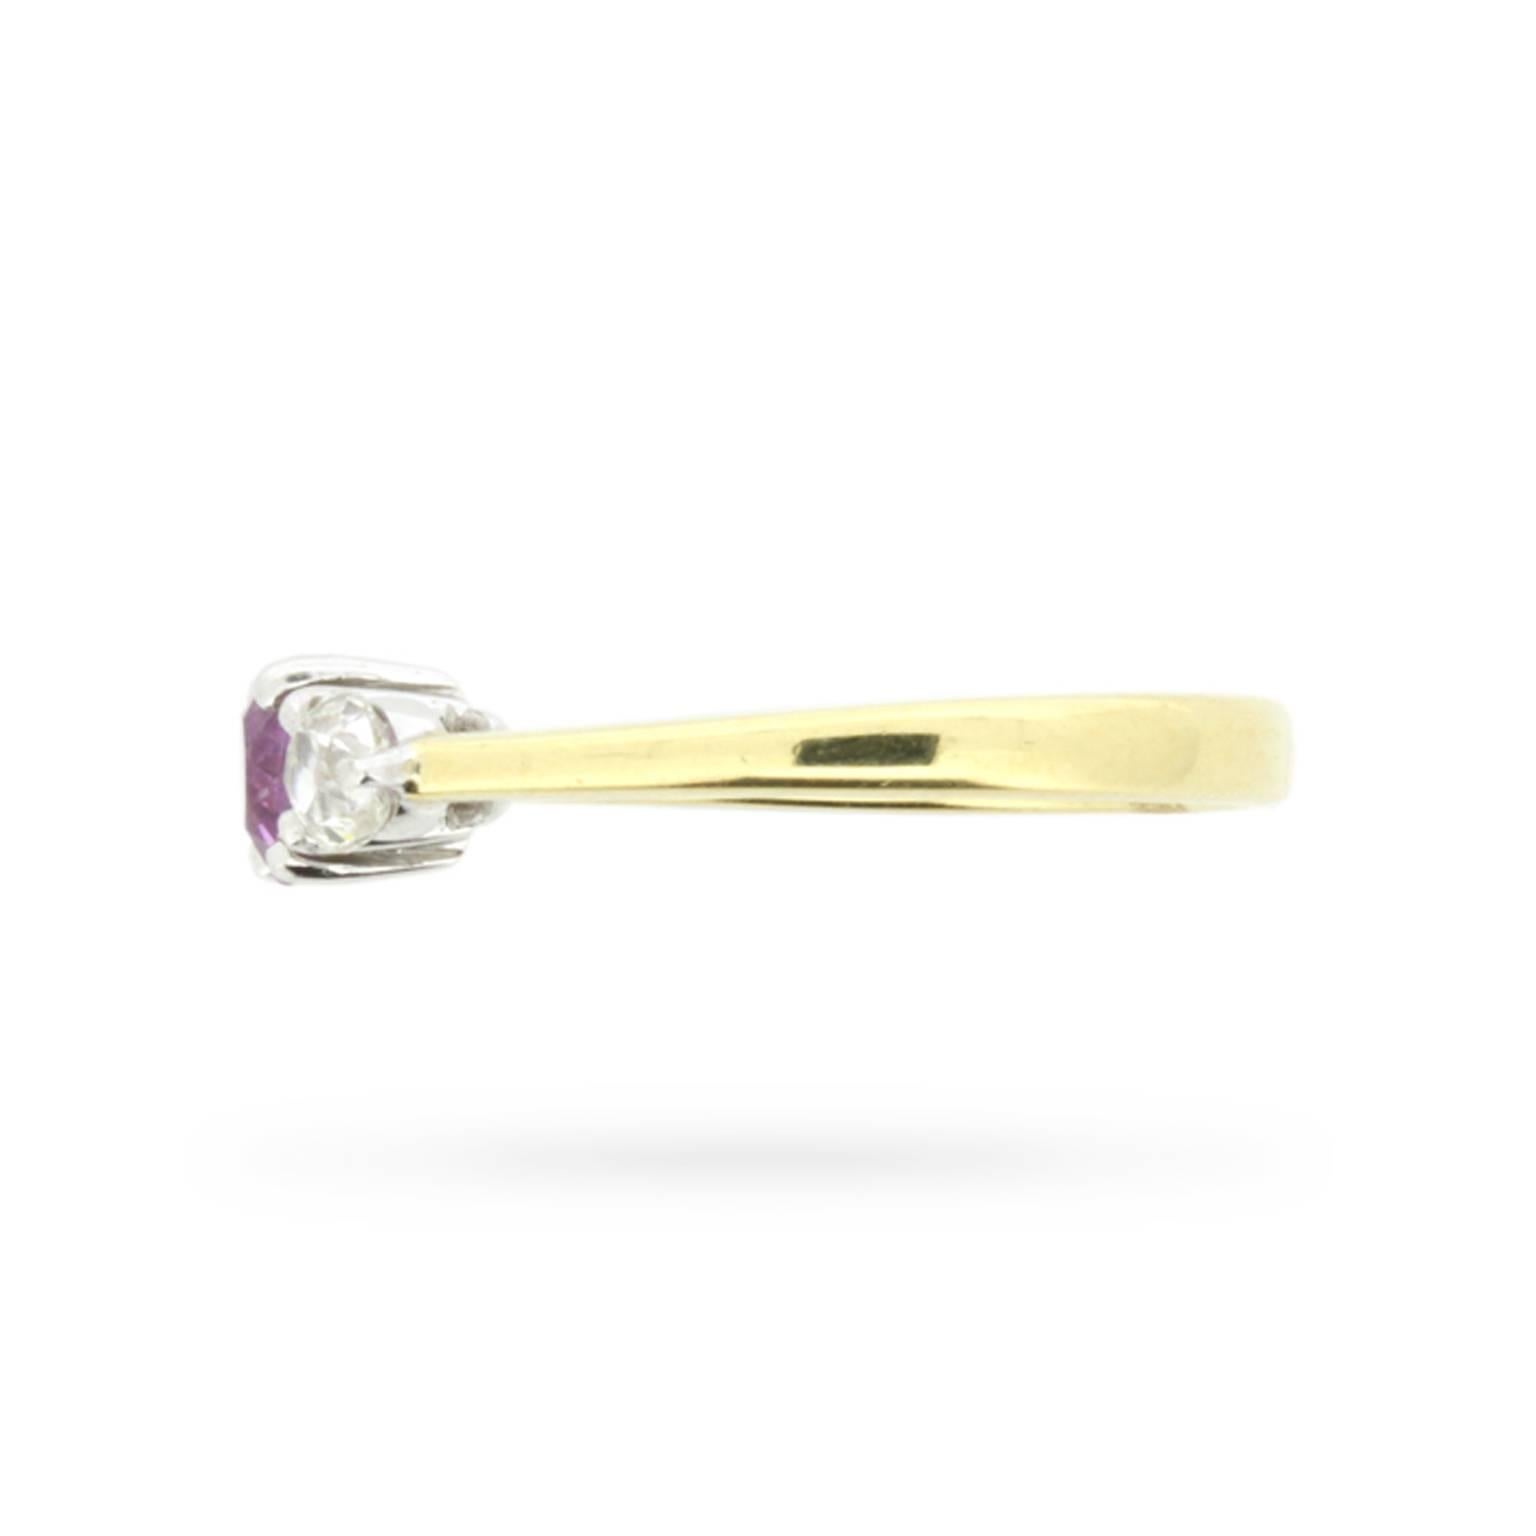 Twin, claw set, old cut diamonds sparkle to either side of a stunning pink sapphire set in 18 carat white gold at the centre of this unusual 1960s take on the timeless three stone engagement ring.

Tapered 18 carat yellow gold shoulders flow to a